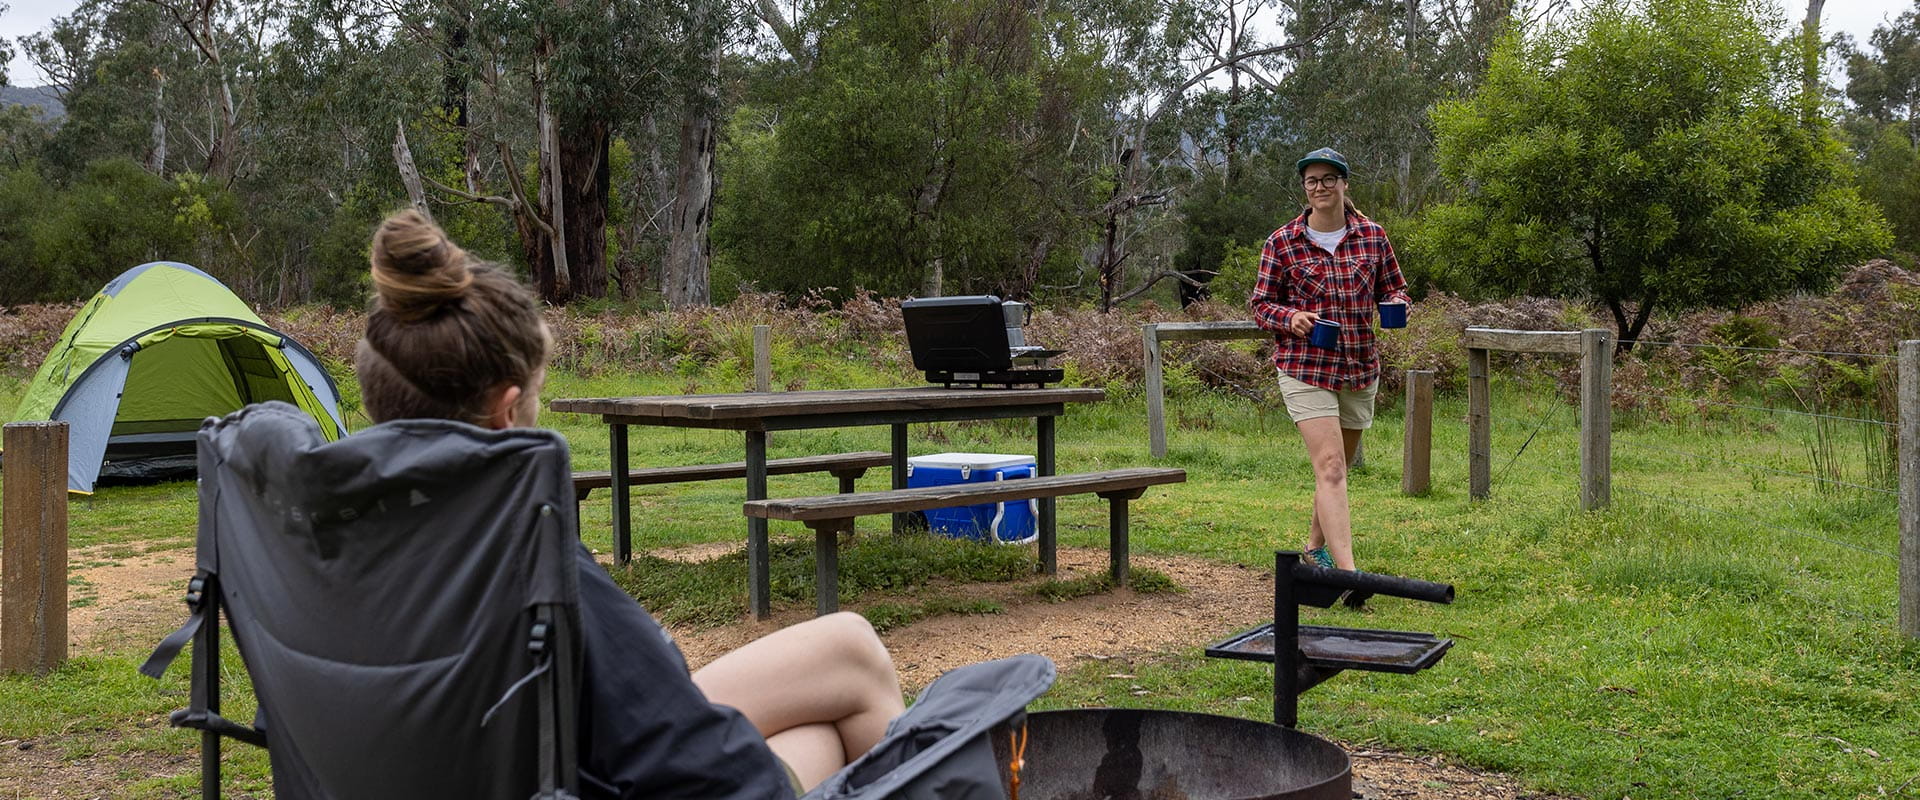 Two hikers relax in a grassy campground